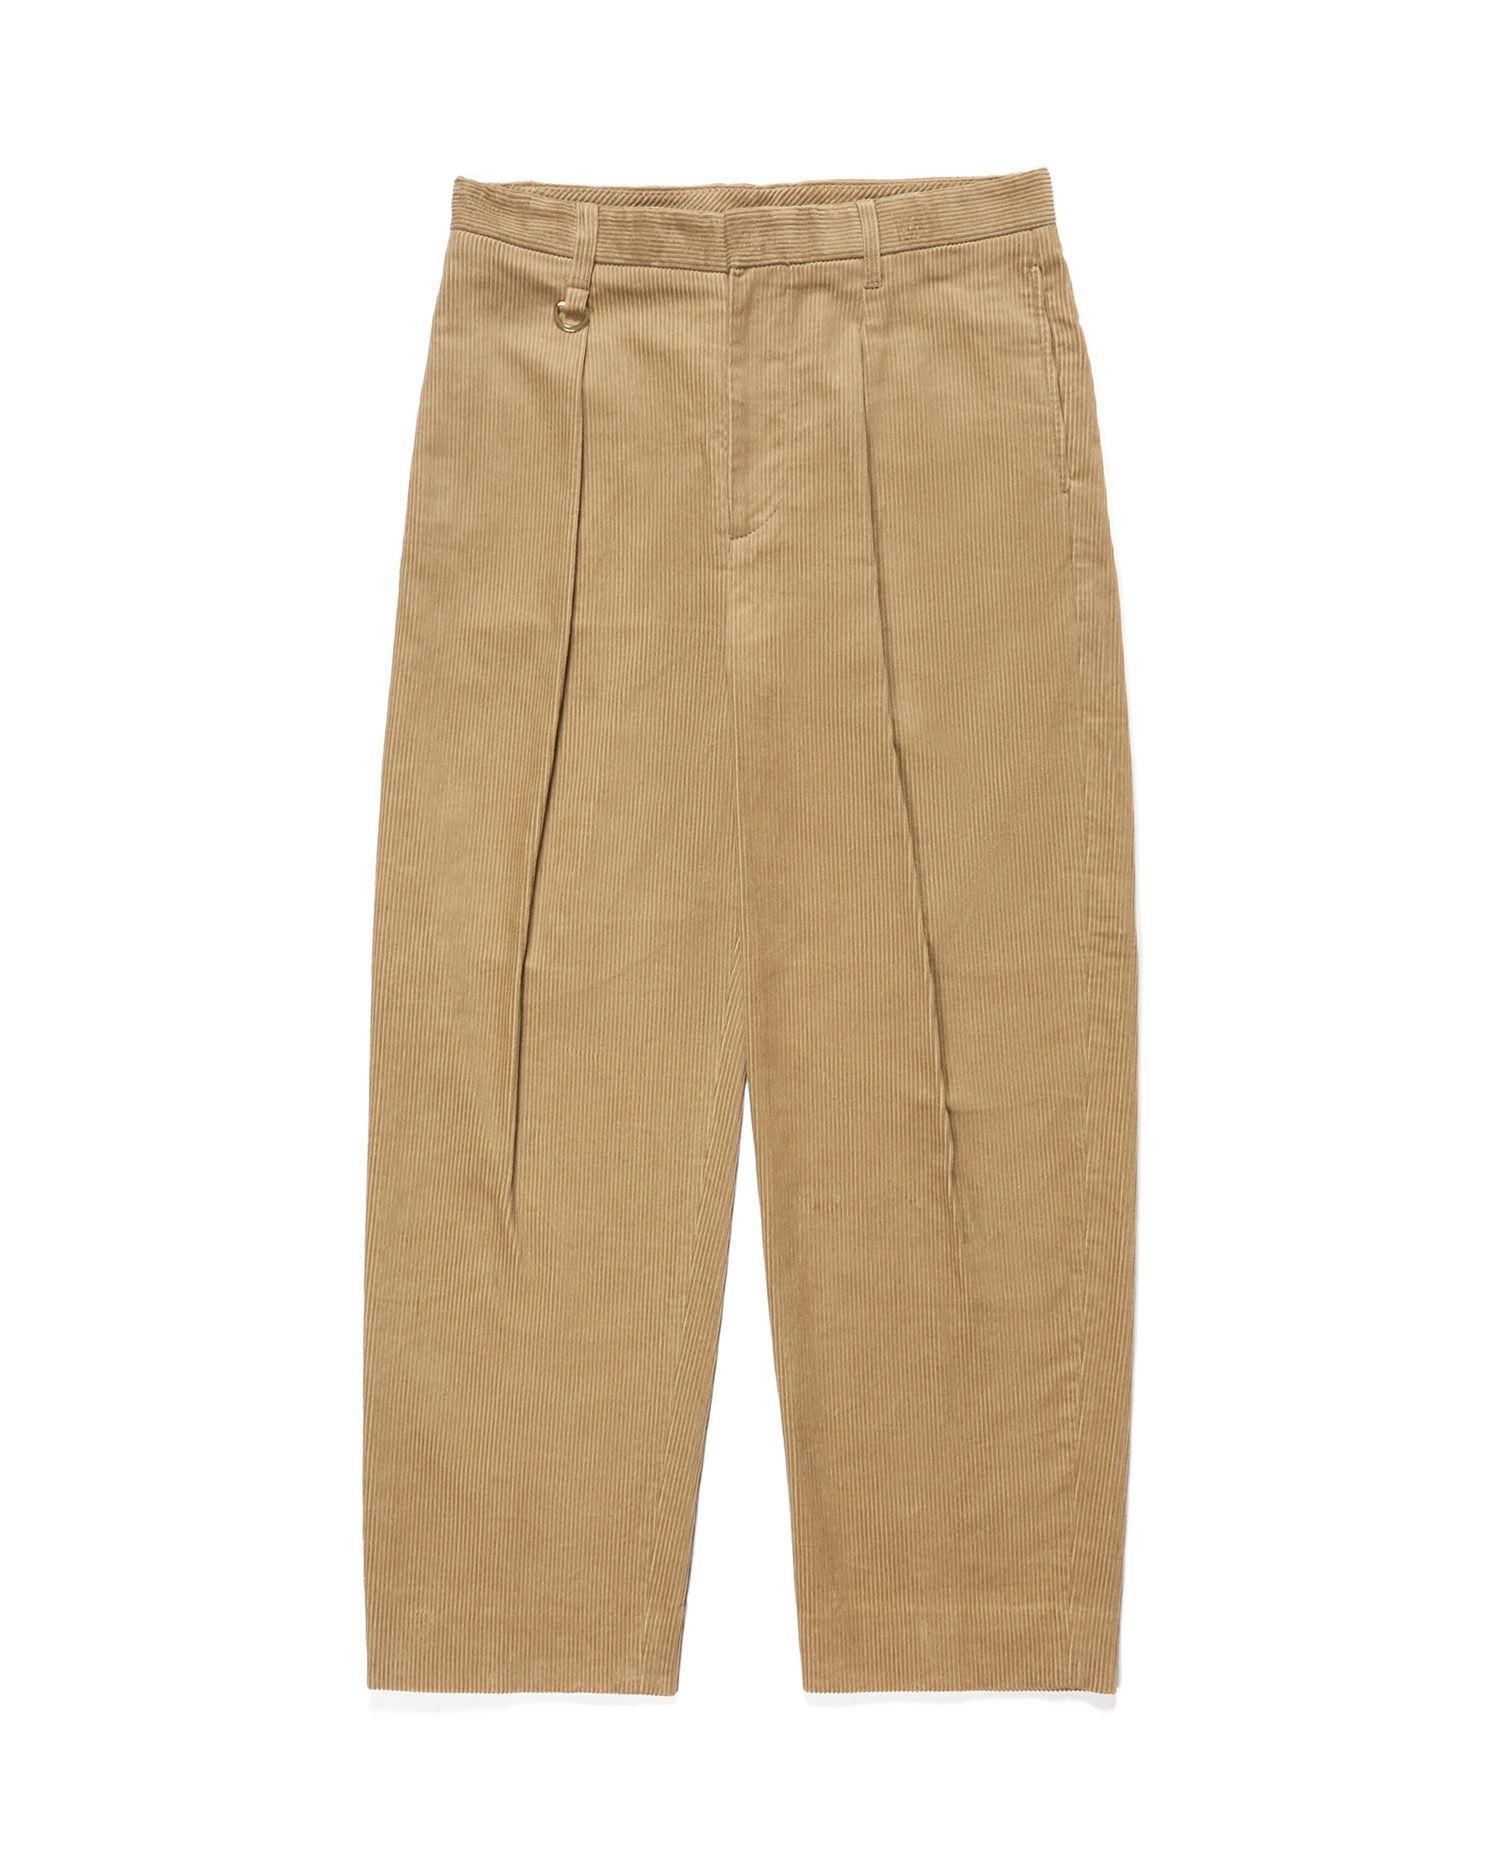 Corduroy pants by BEAUTY&YOUTH MONKEY TIME